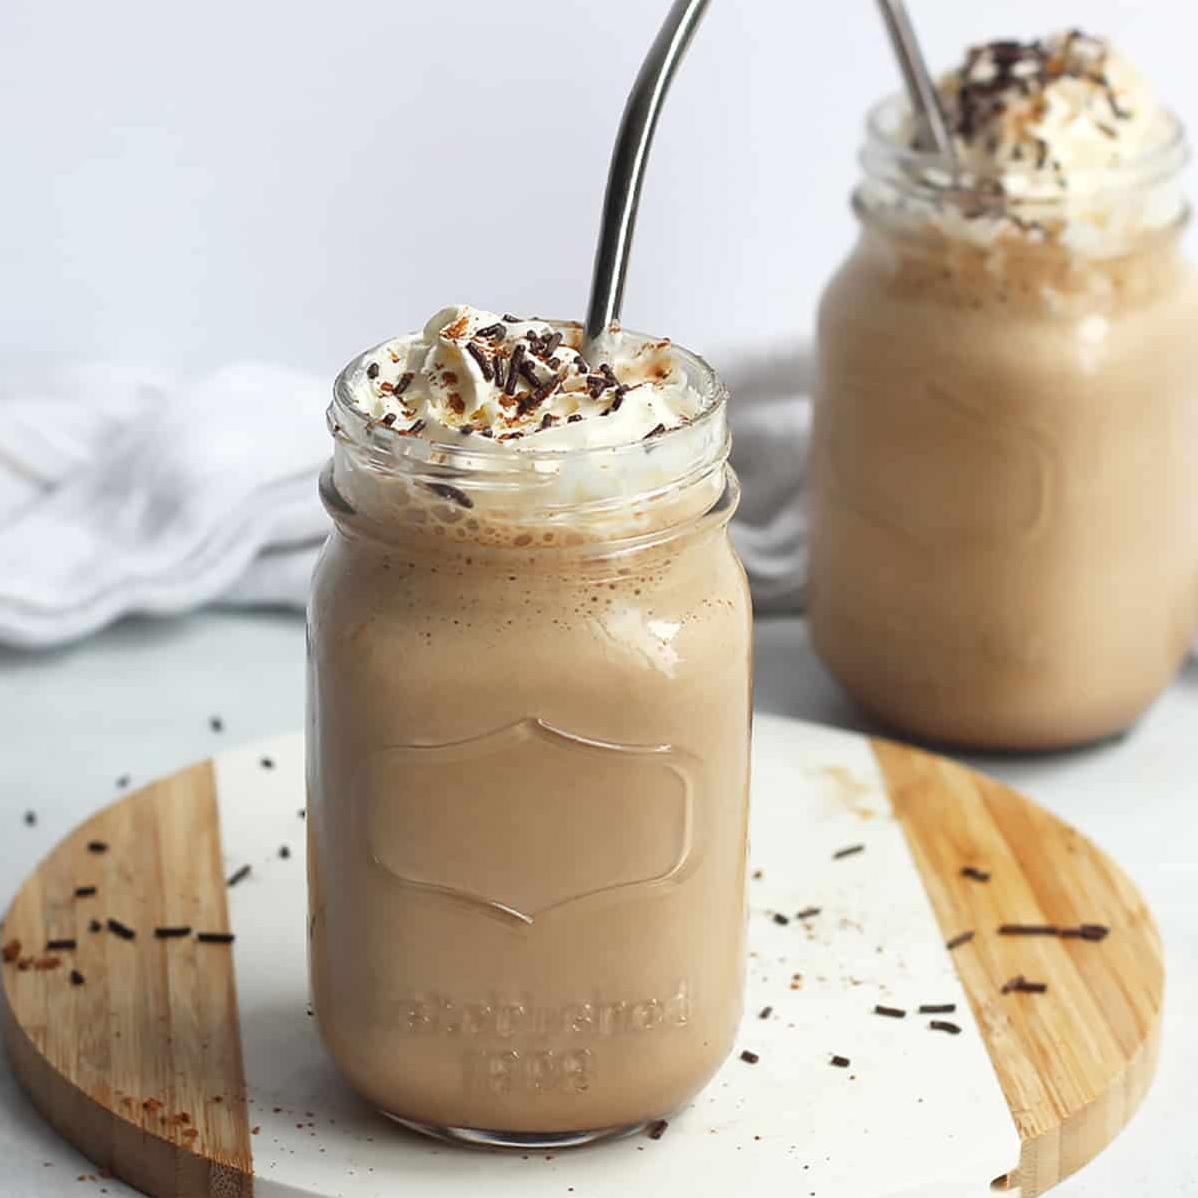  Satisfy your sweet tooth with our indulgent Mocha Latte Shake!